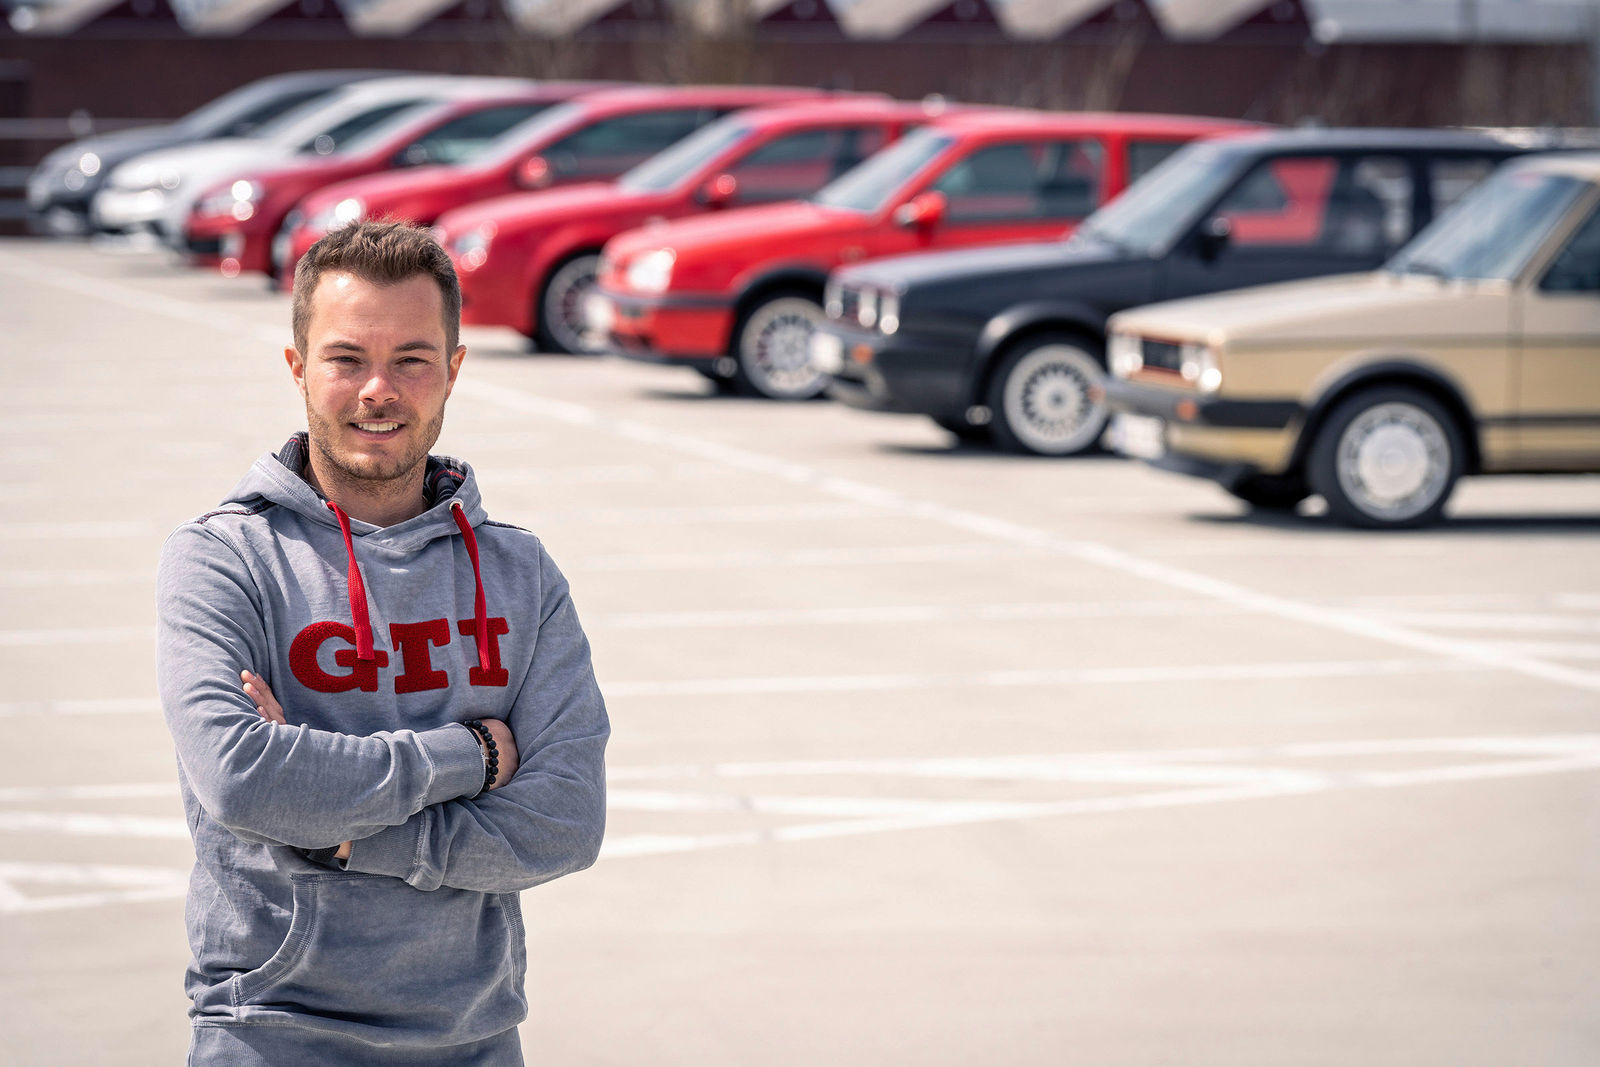 Story: “The Golf GTI Clubsport 45 is quite simply an incredibly good car!”